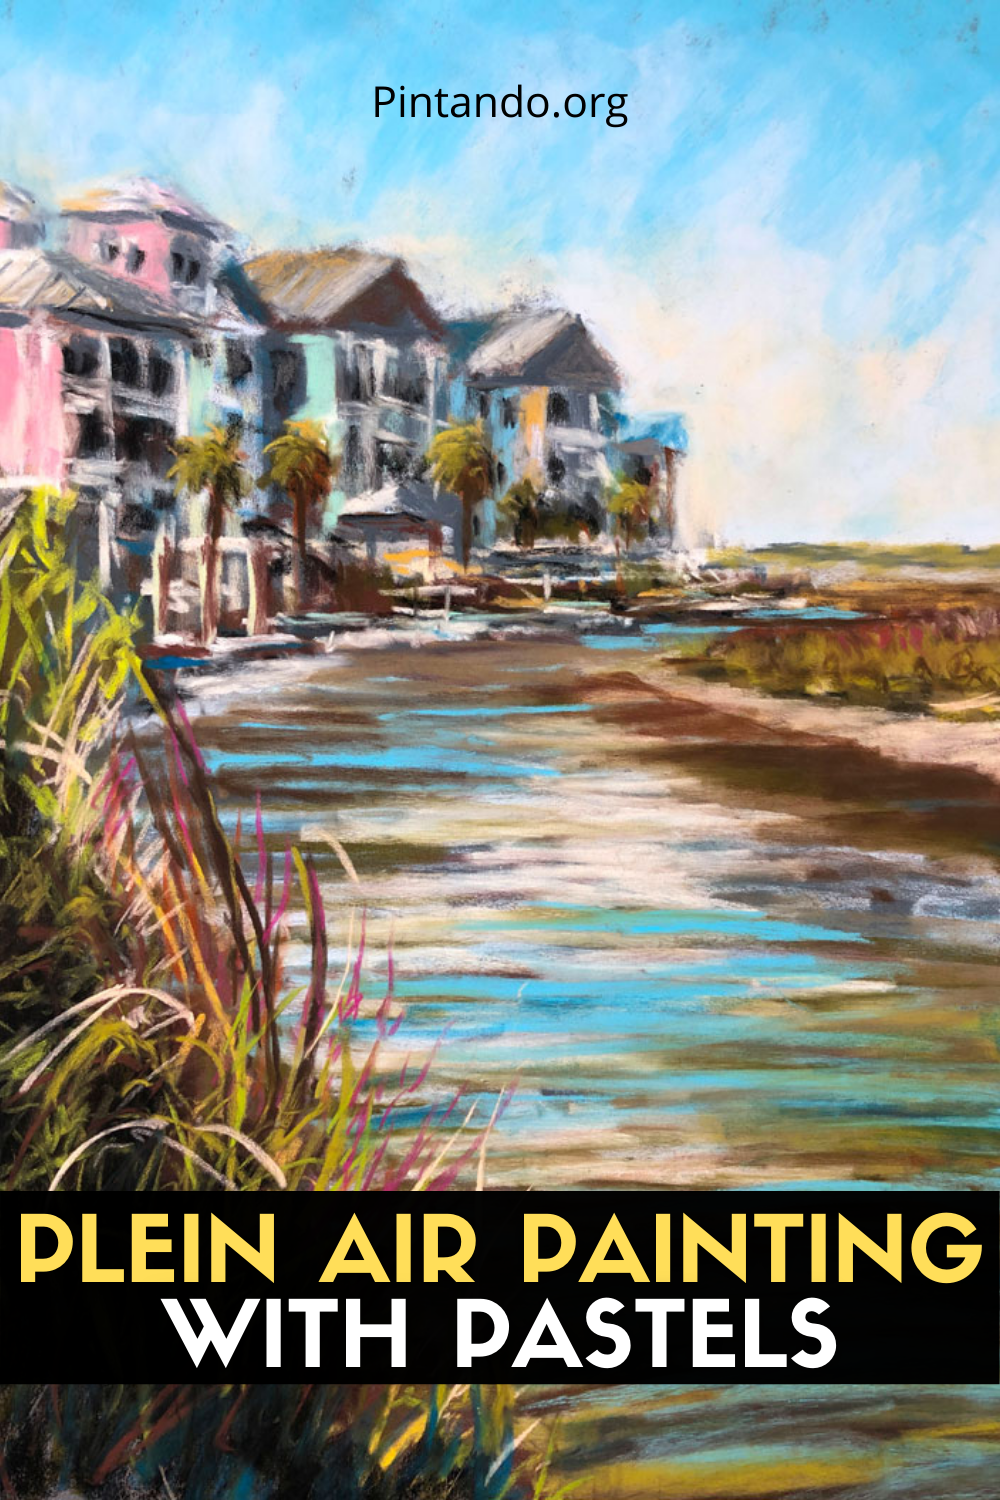 PLEIN AIR PAINTING WITH PASTELS